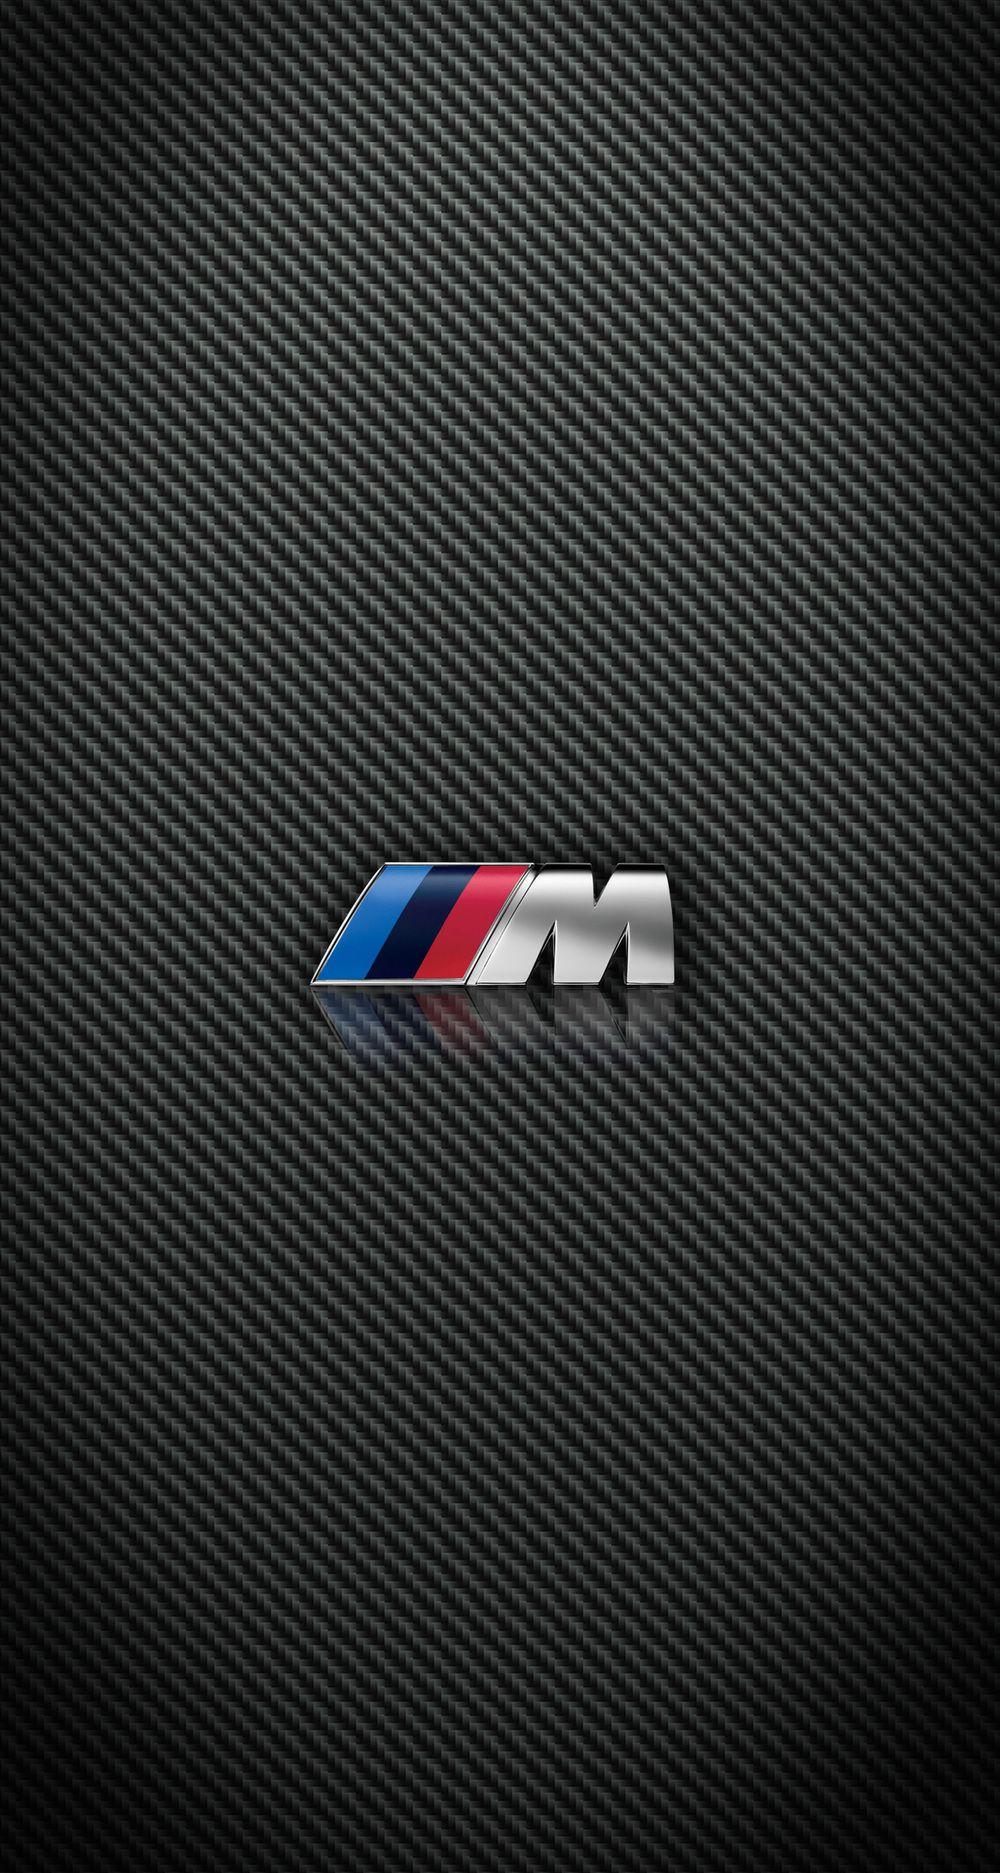 BMW M Power Wallpapers - Top Free BMW M Power Backgrounds - WallpaperAccess